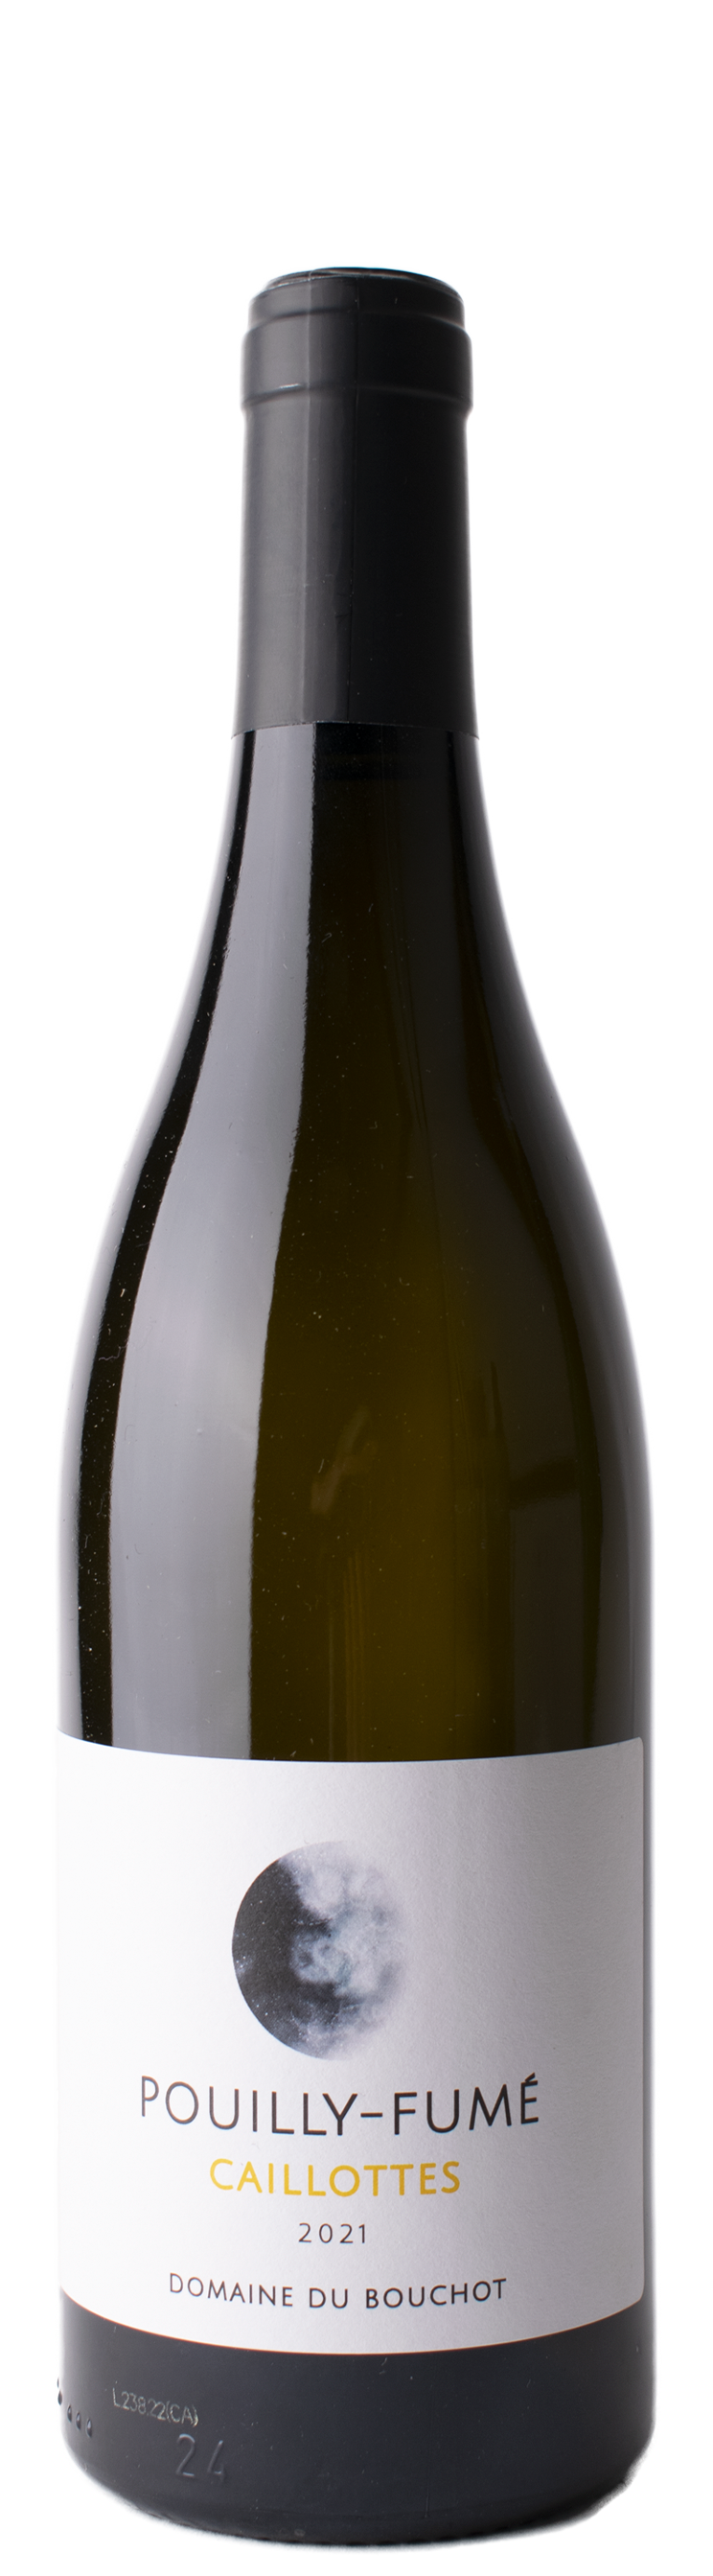 Pouilly Fume Caillottes 2021 1.5 L